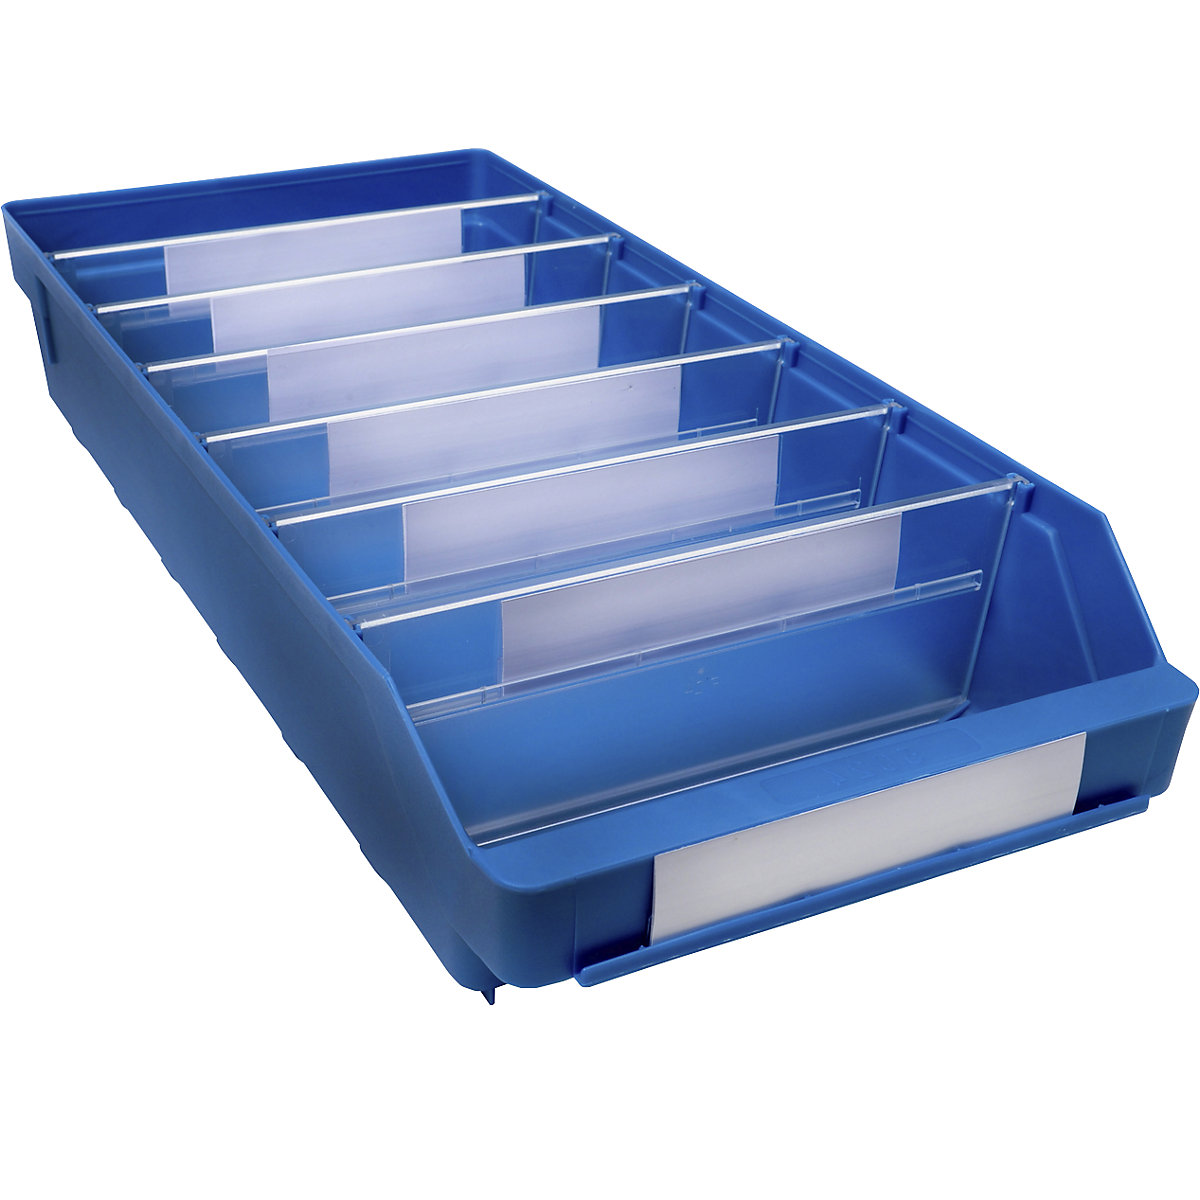 Shelf bin made of highly impact resistant polypropylene – STEMO, blue, LxWxH 500 x 240 x 95 mm, pack of 15-14